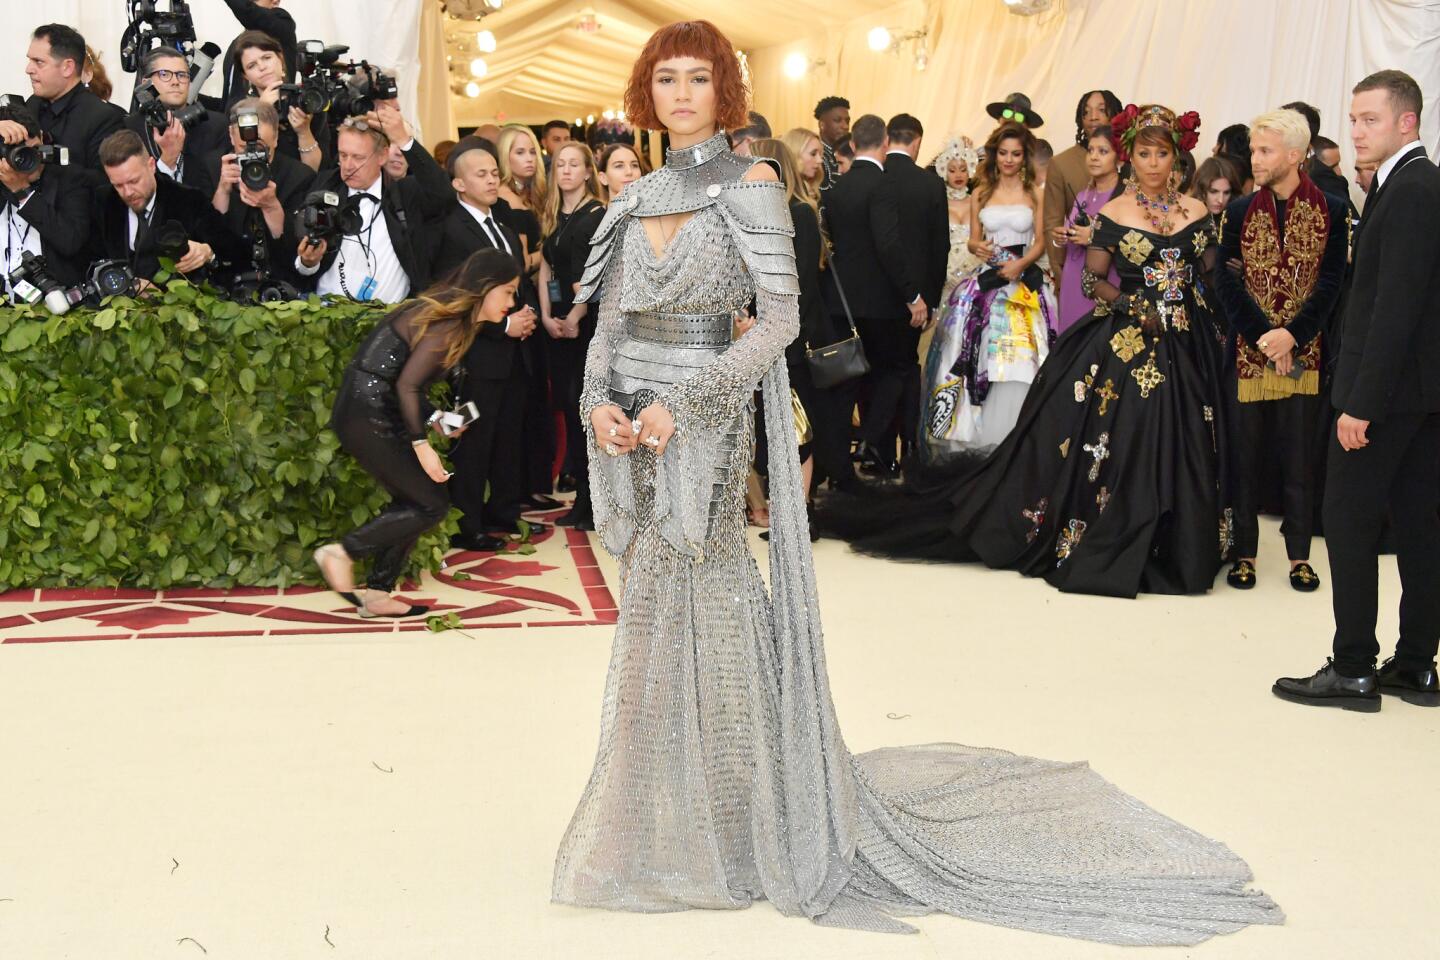 Paging Joan of Arc